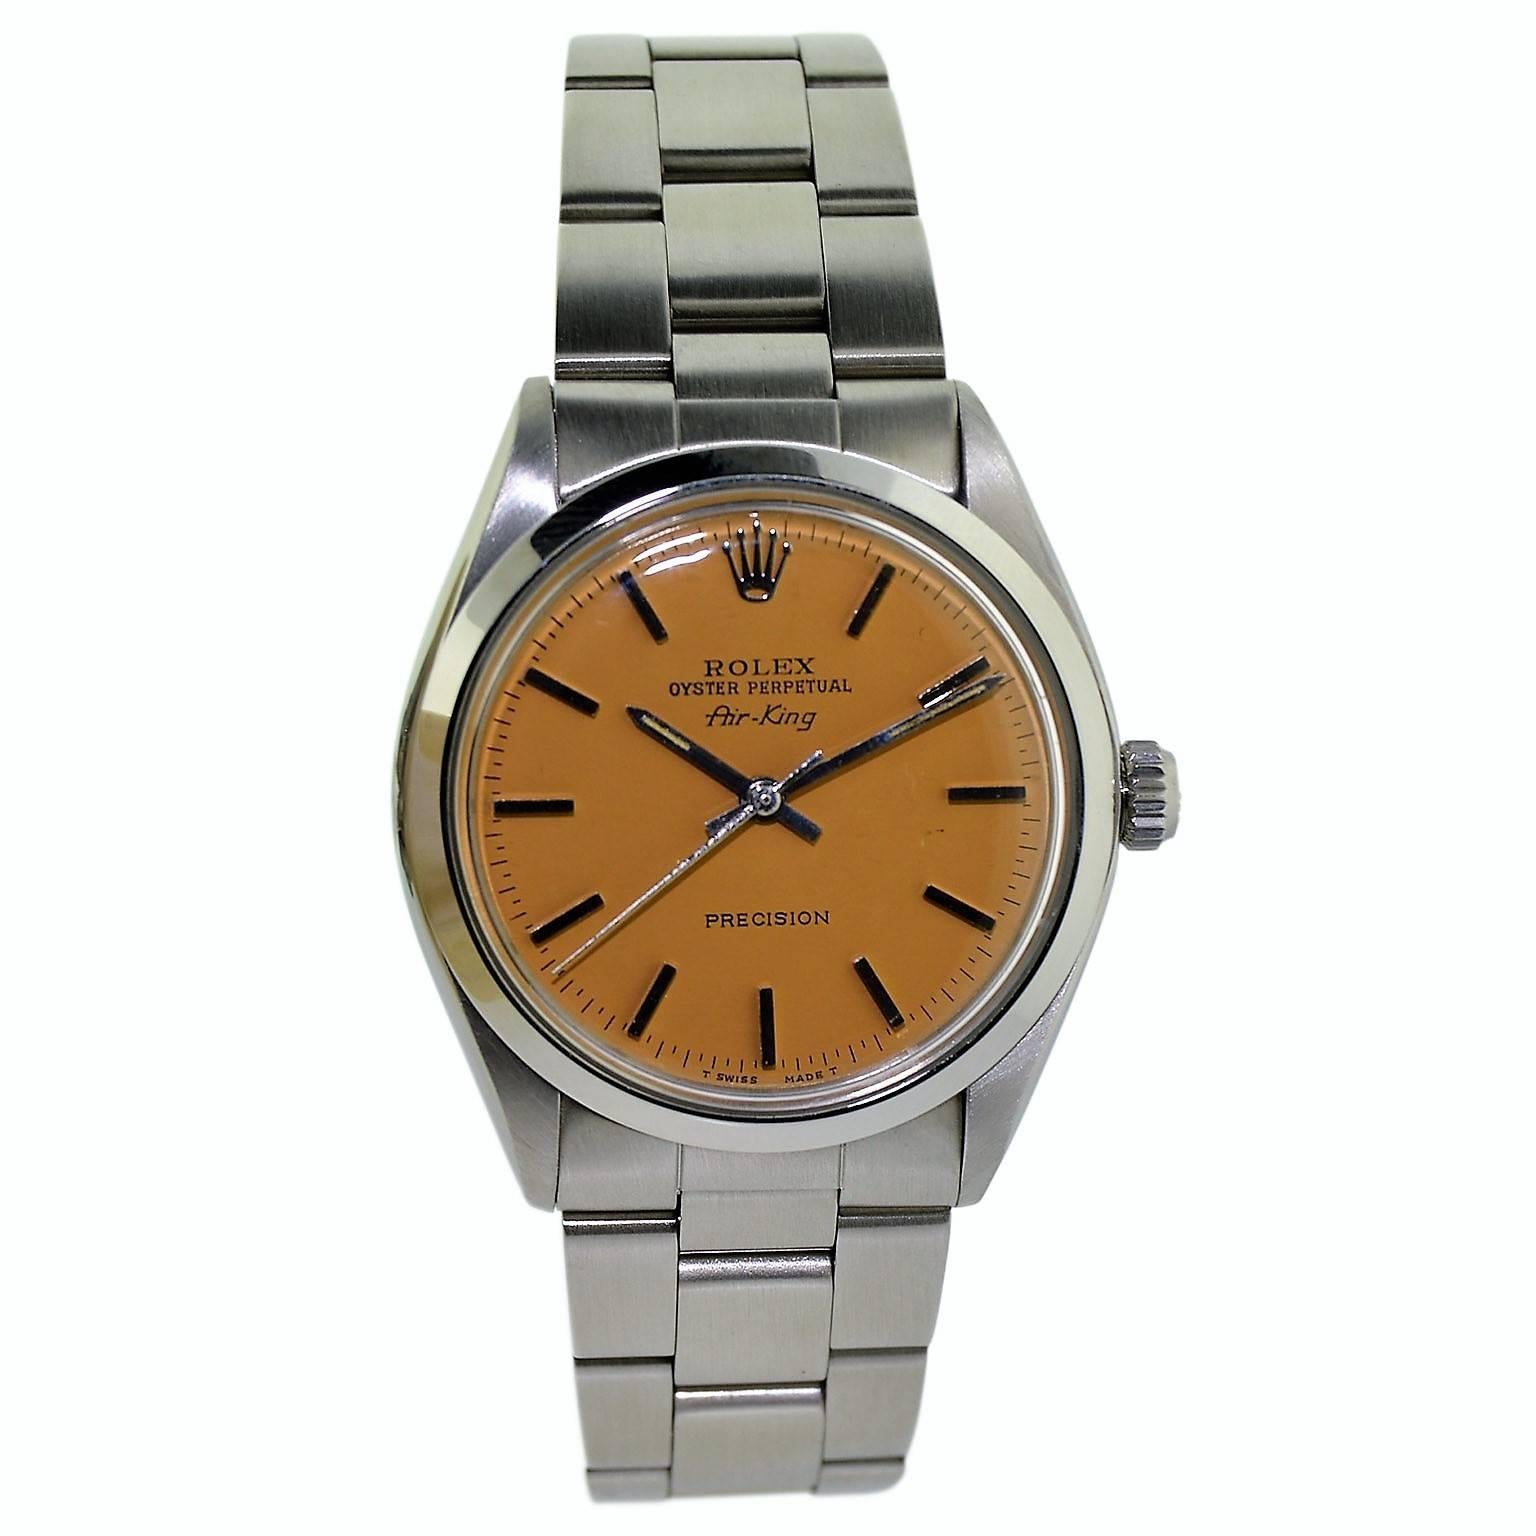 FACTORY / HOUSE: Rolex Watch Company
STYLE / REFERENCE: Air King / Reference  5500
METAL / MATERIAL: Stainless Steel 
CIRCA: Mid 1970's
DIMENSIONS: Length 39mm X Diameter 34mm
MOVEMENT / CALIBER: Perpetual Winding / 26 Jewels / Caliber 1520
DIAL /